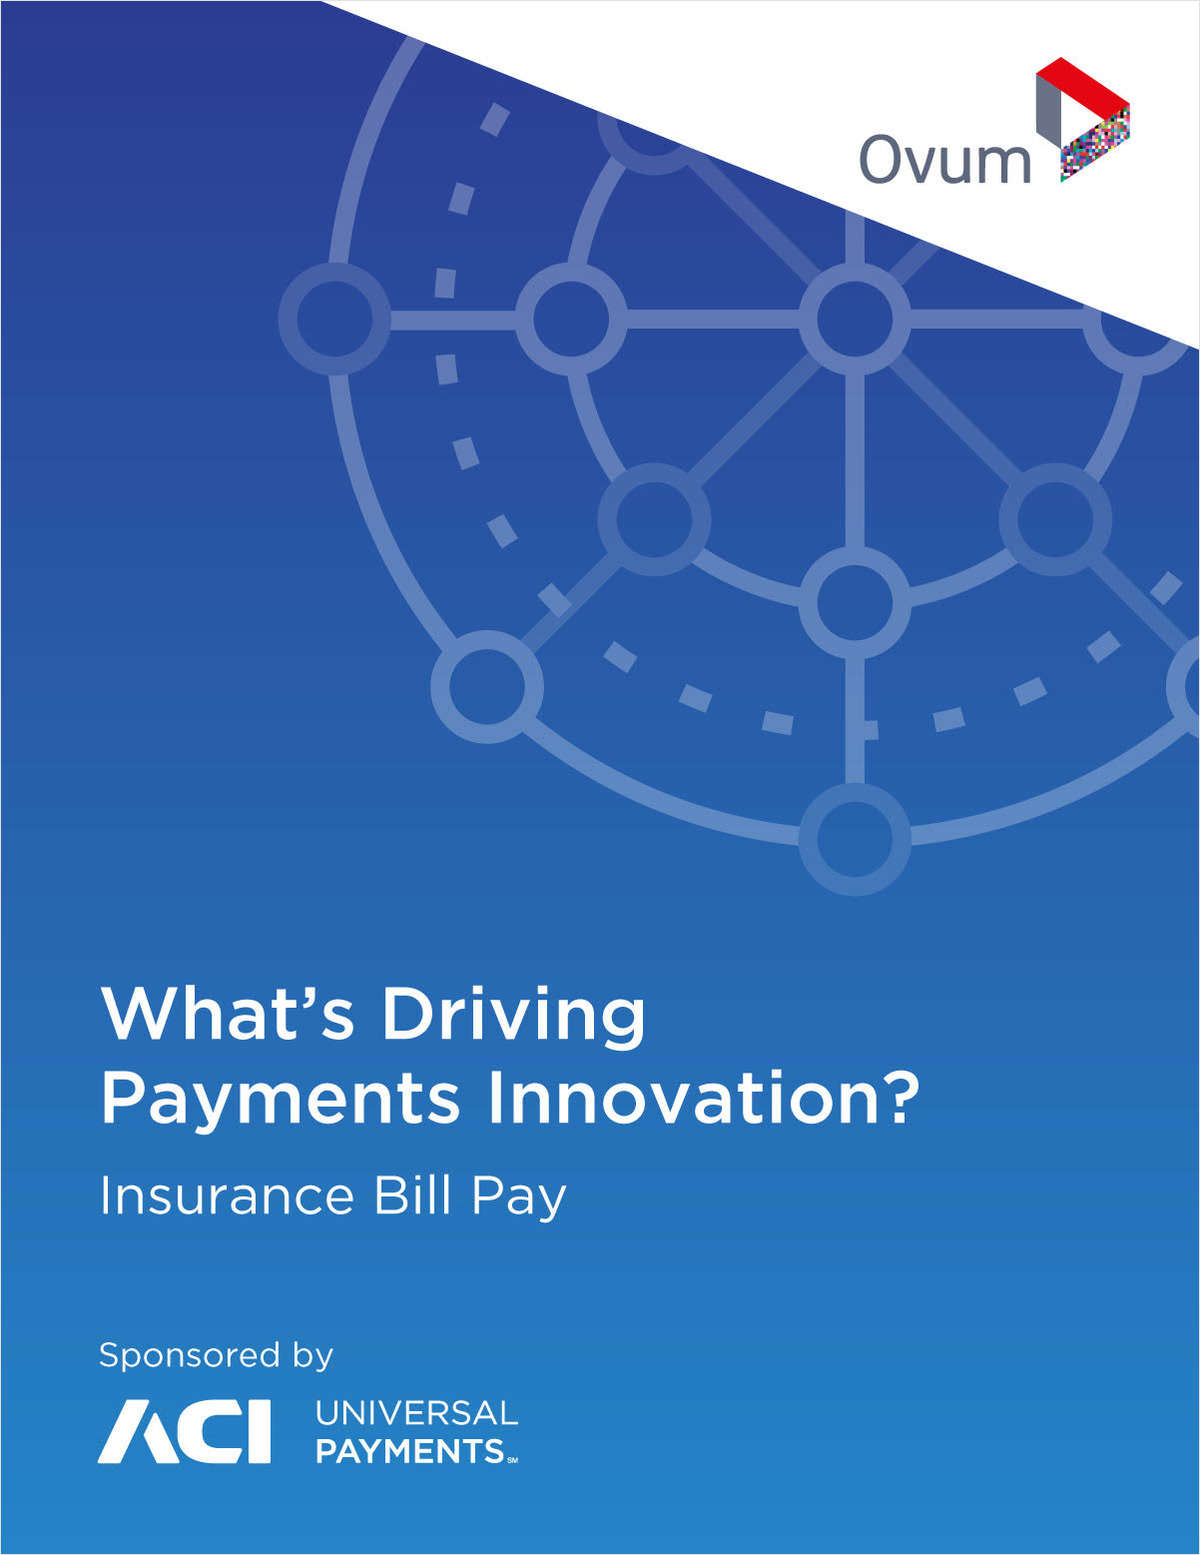 Is Your Insurance Organization a Payments Trailblazer?